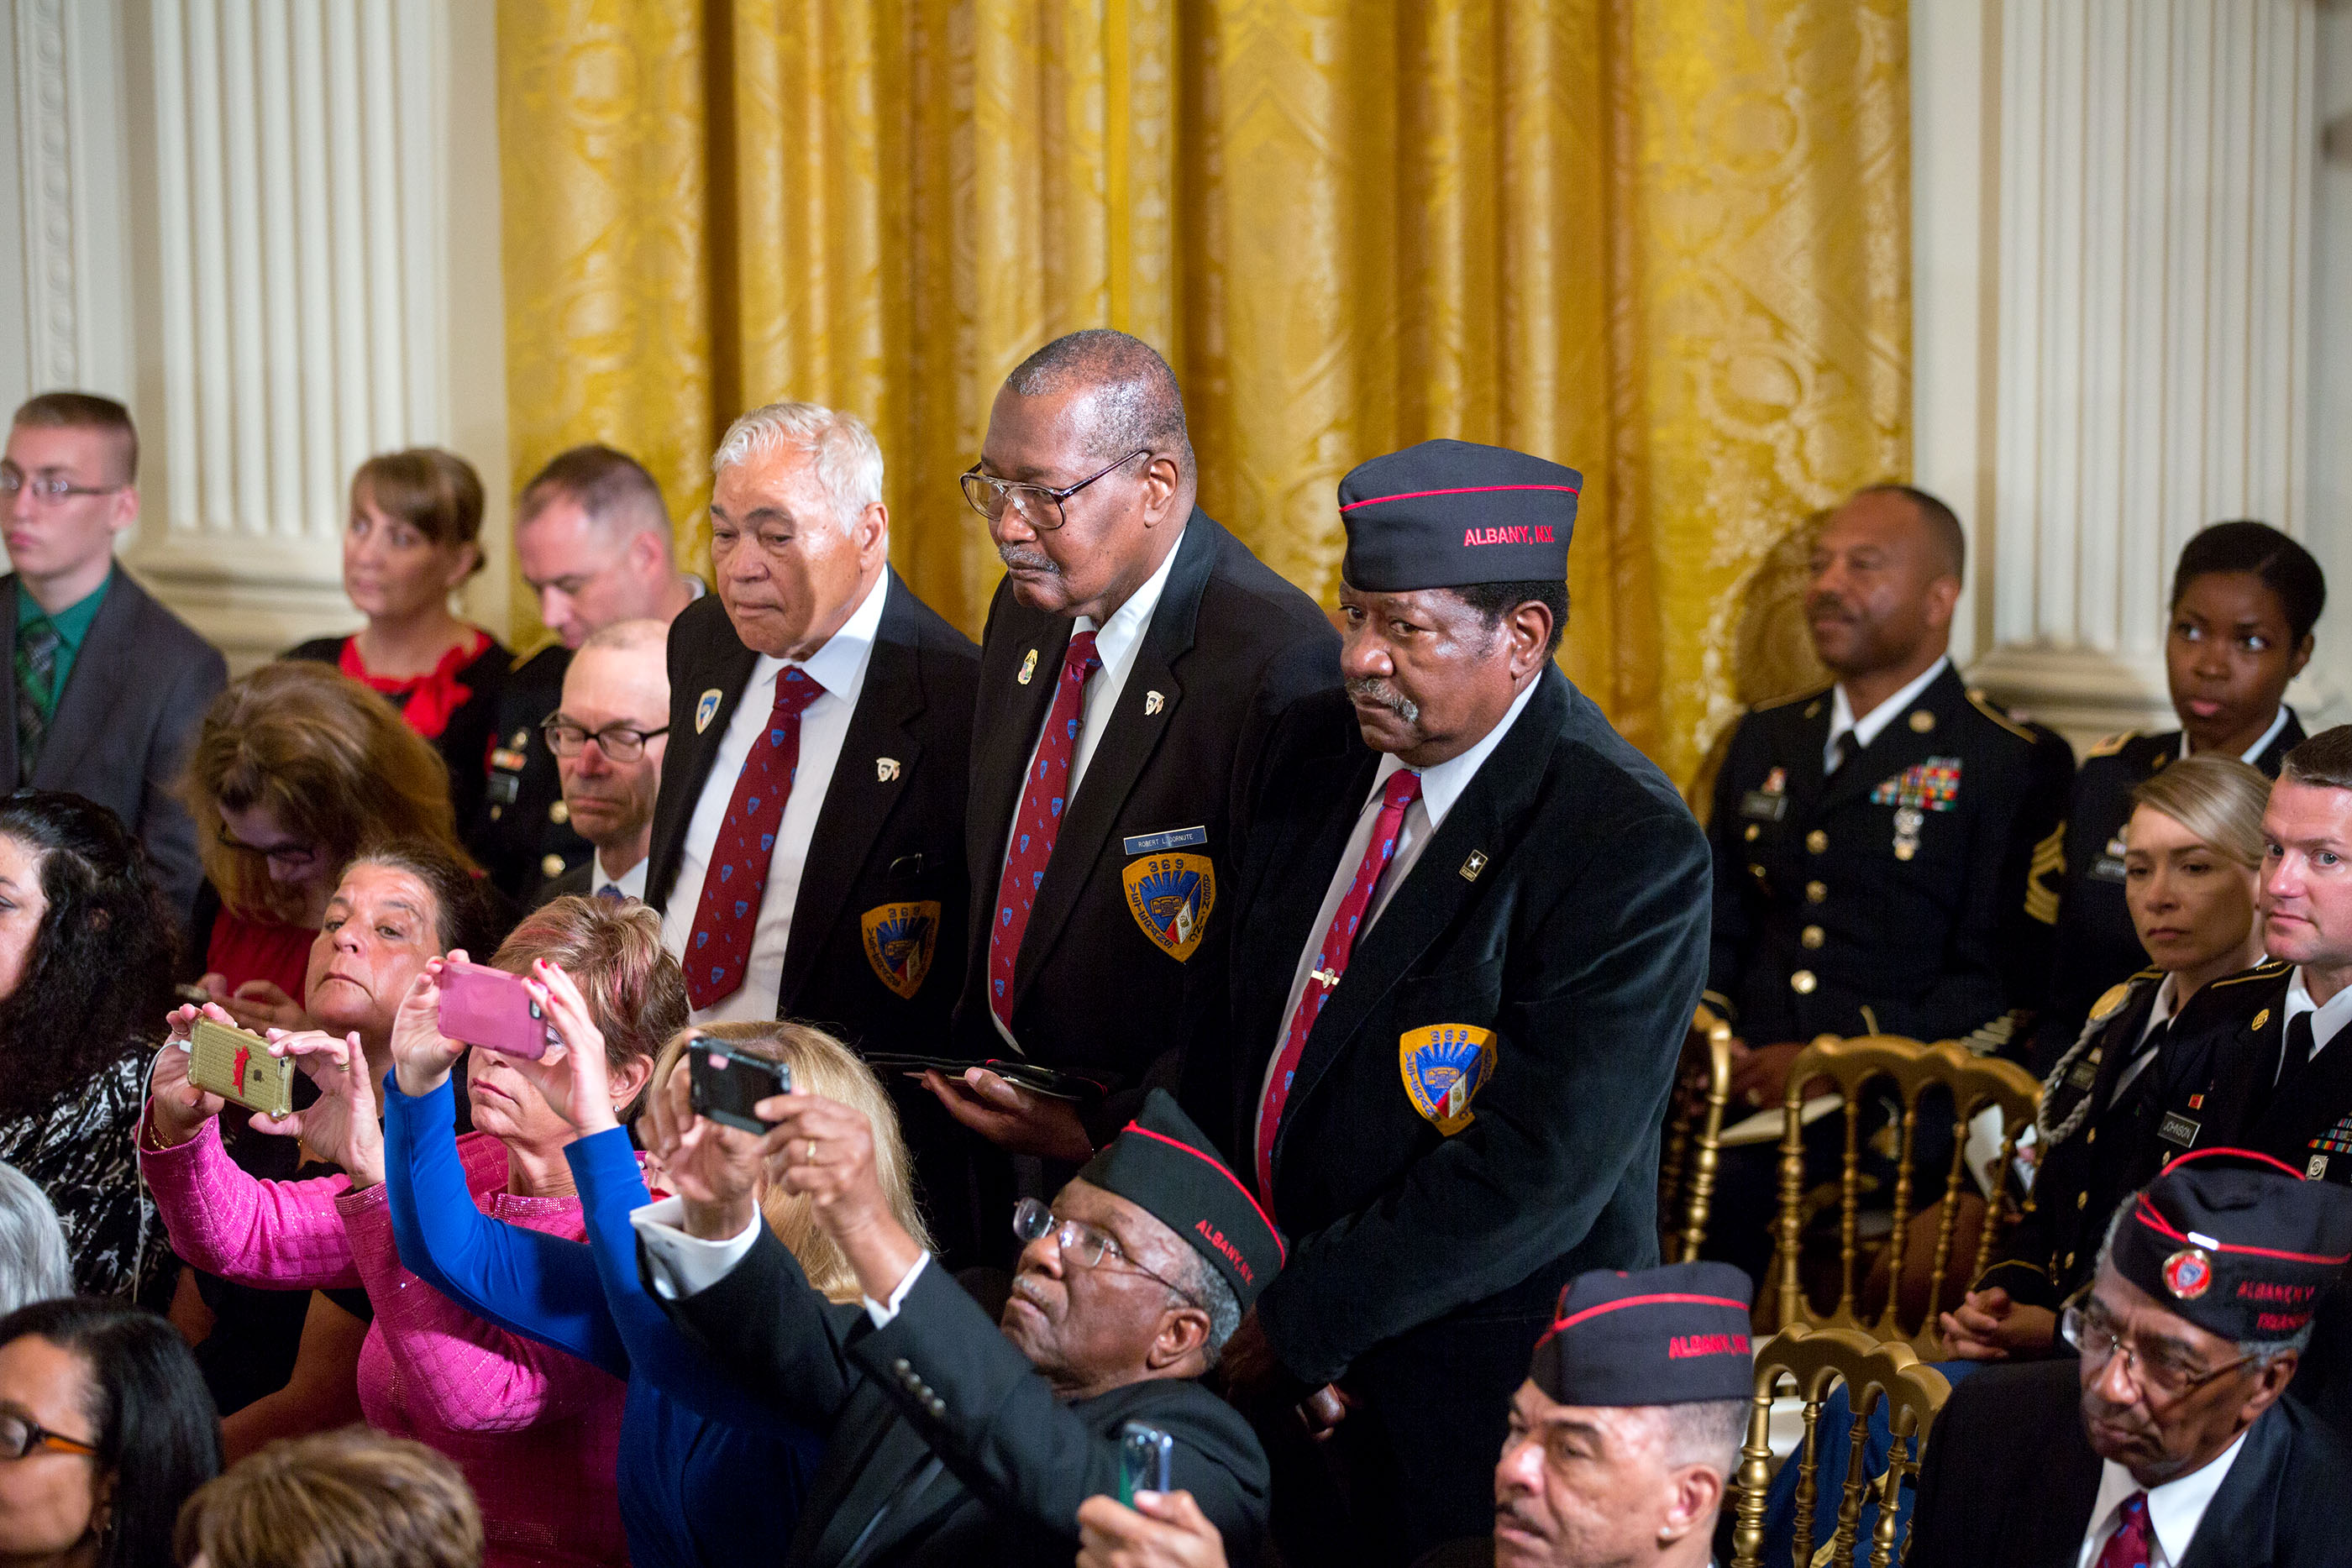 Members of the 369th Infantry Regiment Veterans Association stand as President Barack Obama awards the Medal of Honor posthumously to Army Private Henry Johnson for conspicuous gallantry during World War I, at a ceremony in the East Room of the White Hous